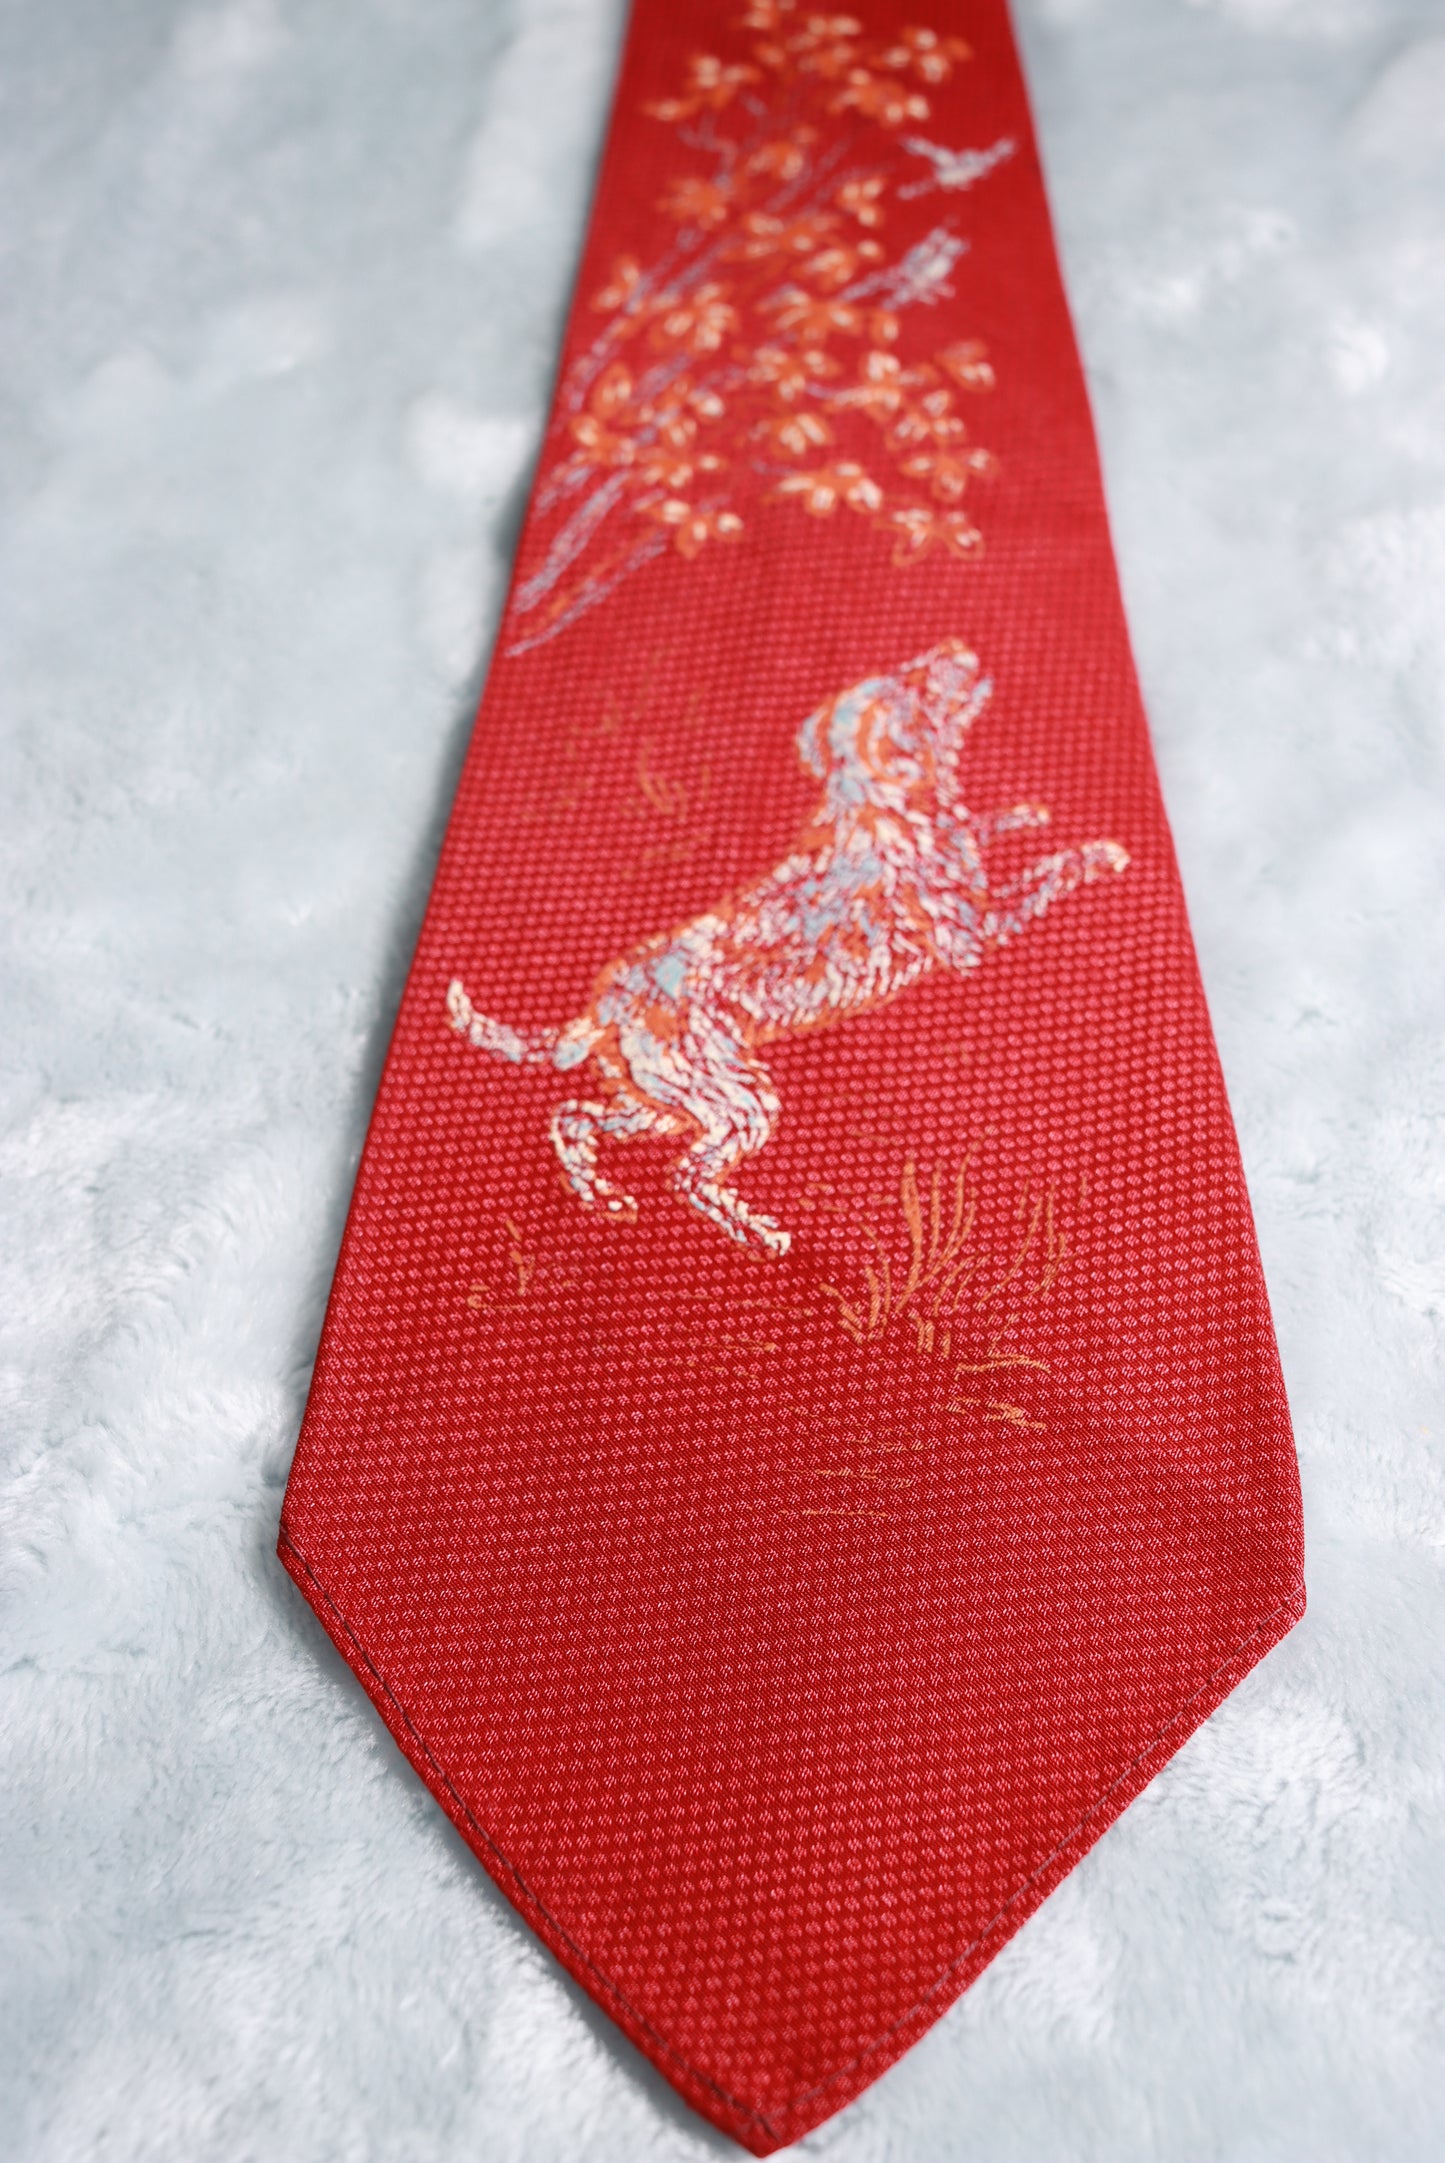 Vintage Towncraft Dog Chasing Birds Swing Tie 1940s/50s